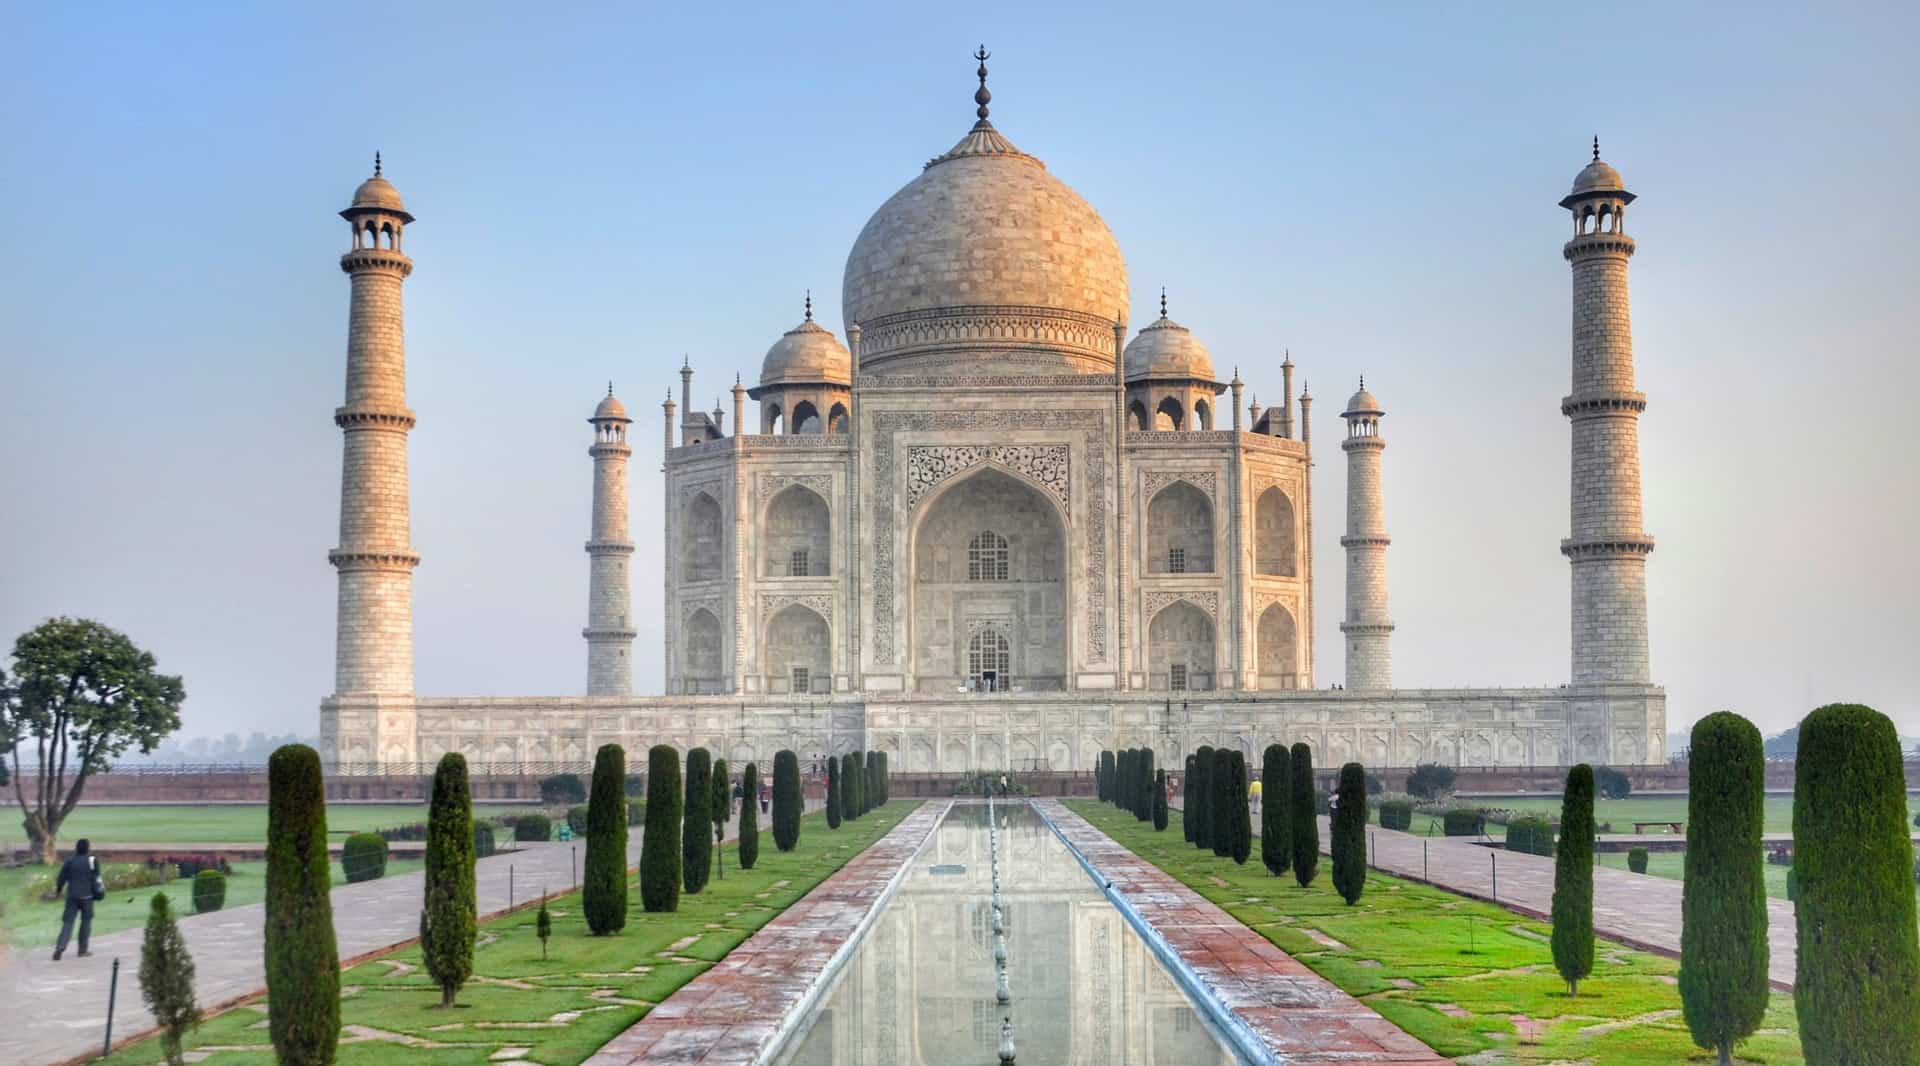 50 Intriguing Taj Mahal Facts That Will Make You Want To Visit